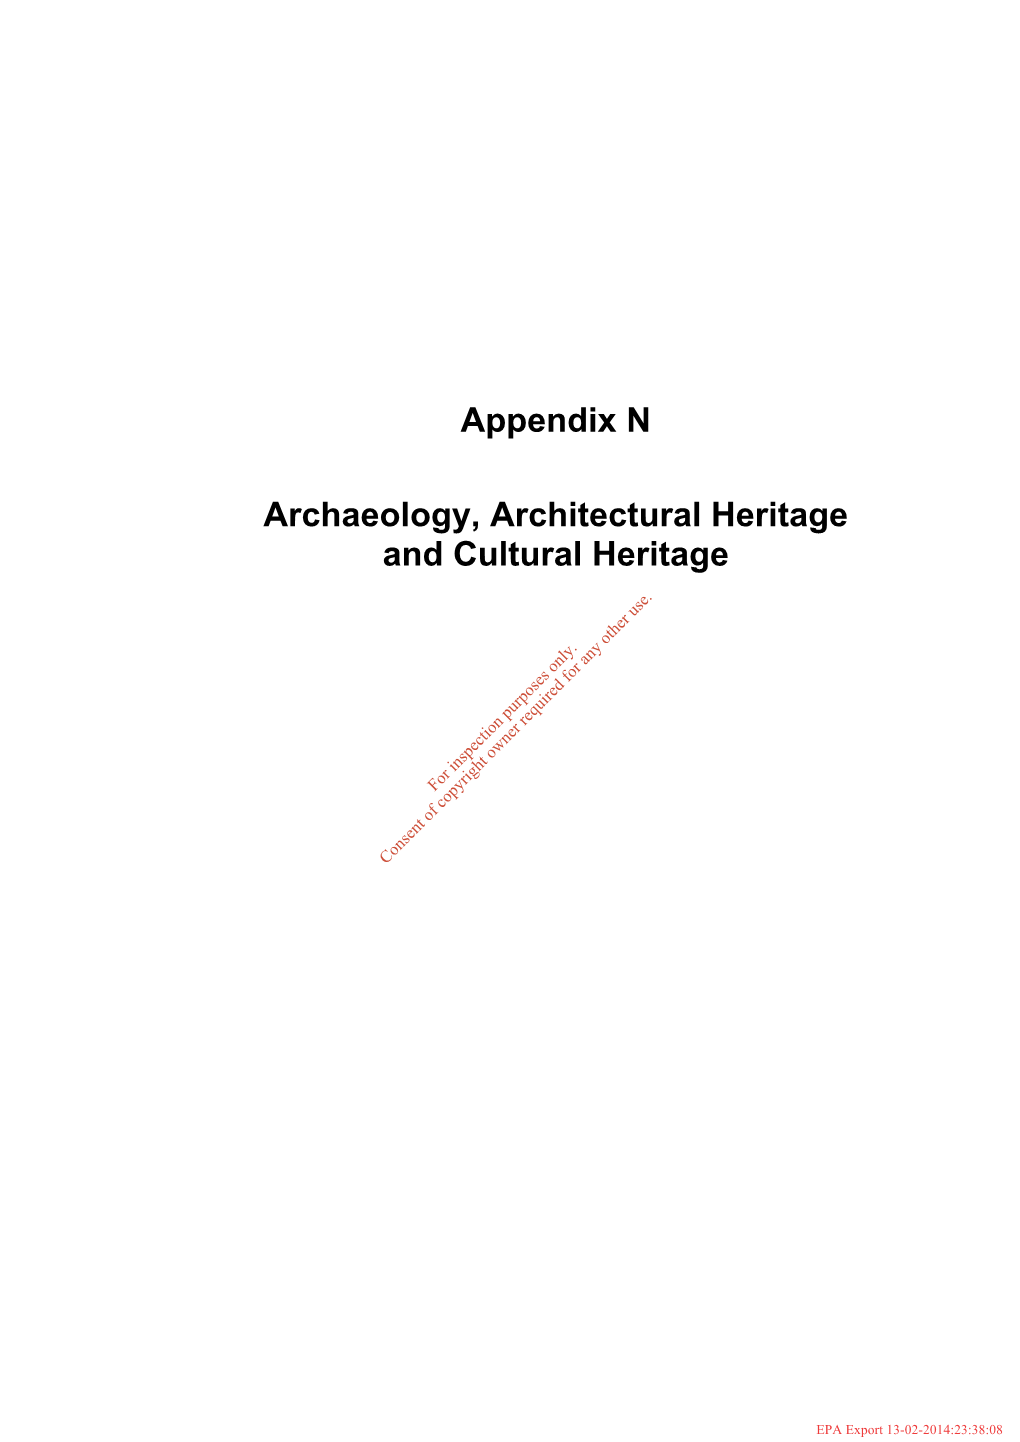 Appendix N Archaeology, Architectural Heritage and Cultural